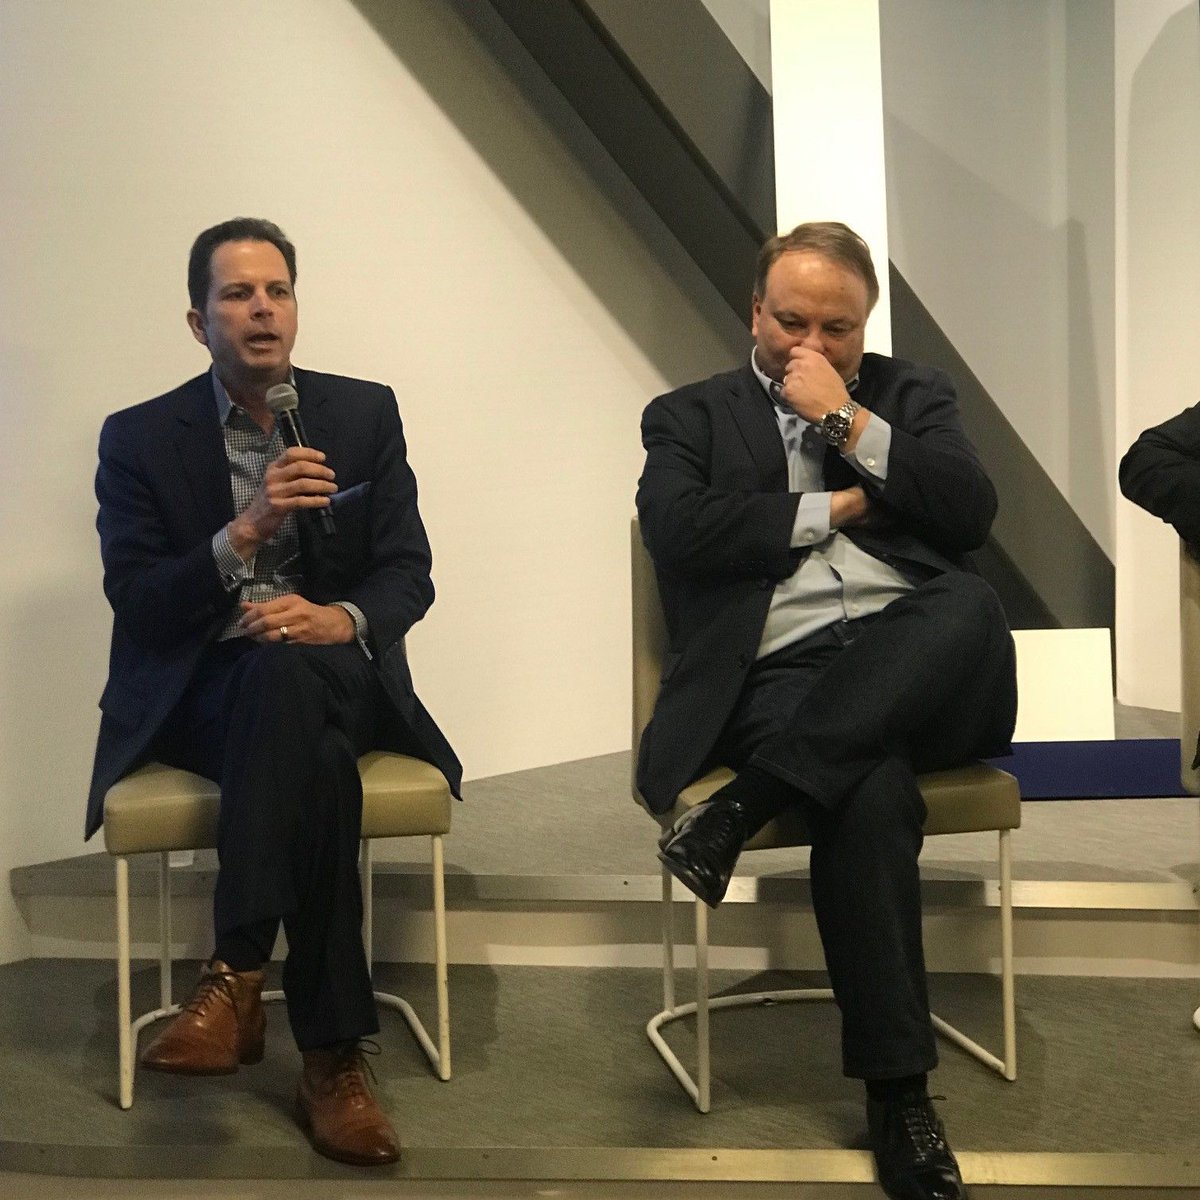 What a fantastic night of spectacular panelists! #EmergingLeaders are extremely grateful for Keith Cox, Patrick Drouillard and Efrain Inzunza 's knowledge-filled gathering. #leadership #socal